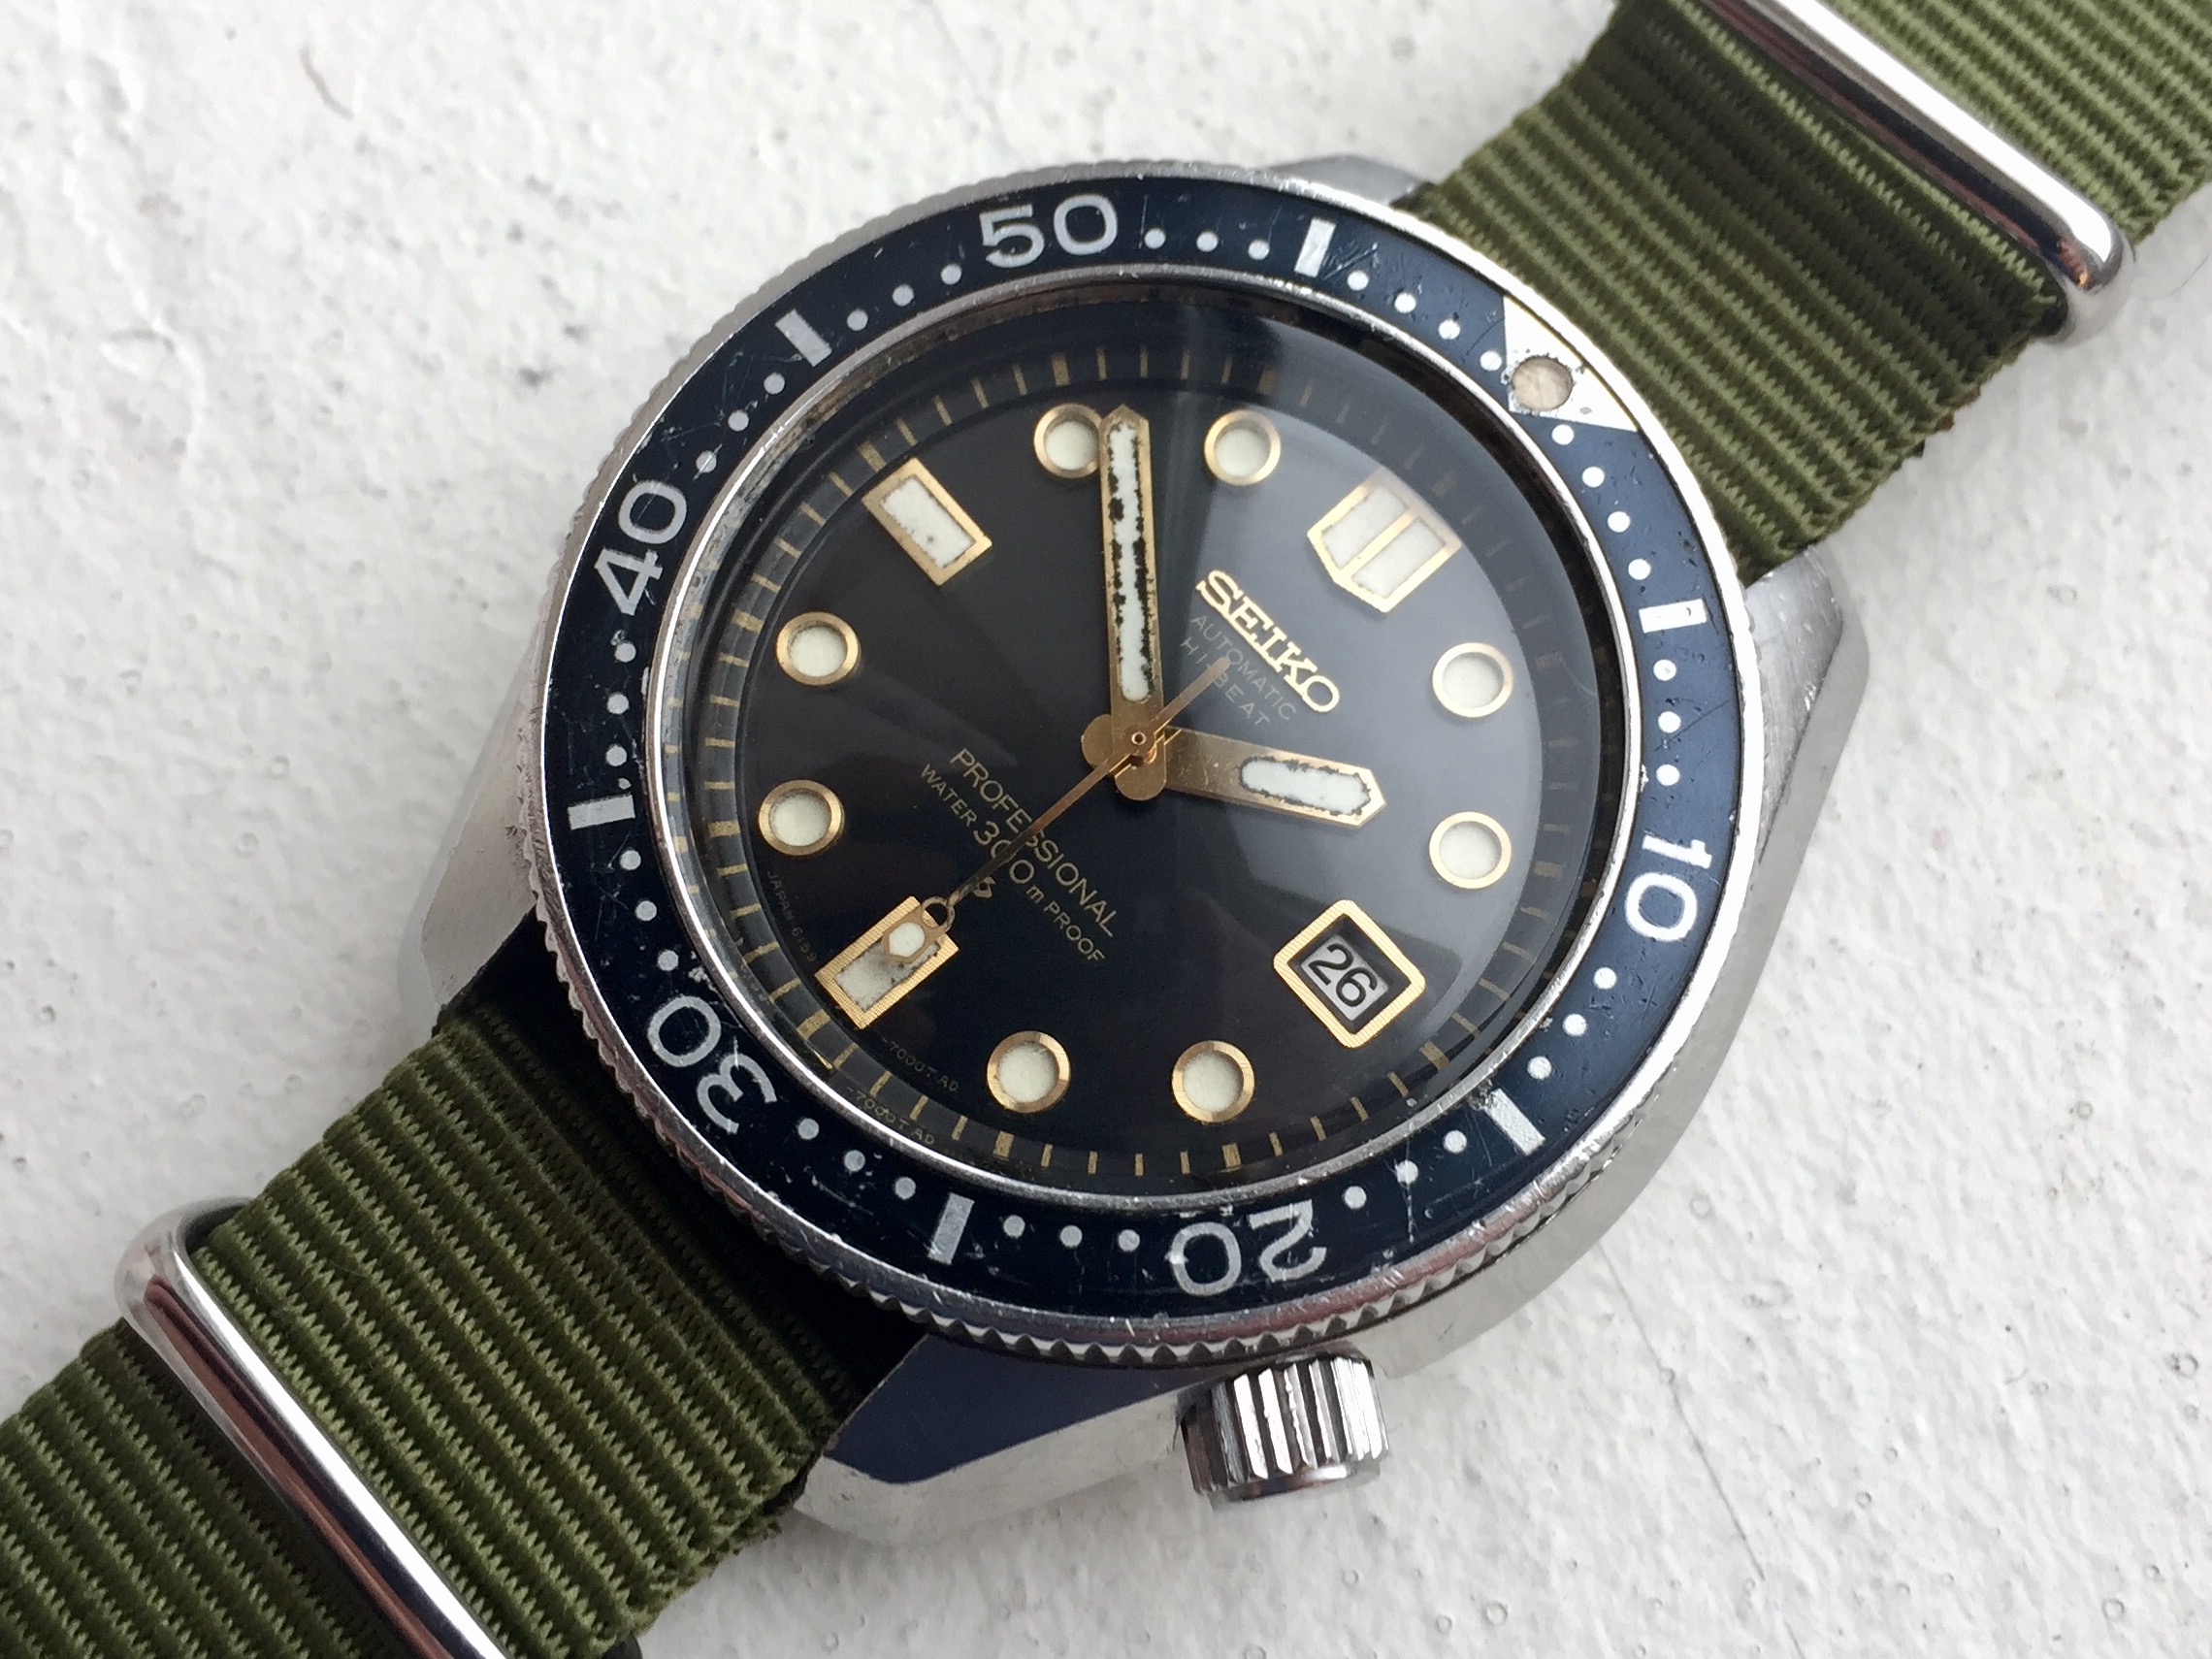 Banzai stang passage New arrival: SEIKO 6159-7001 – yonsson – Watches, inside and out